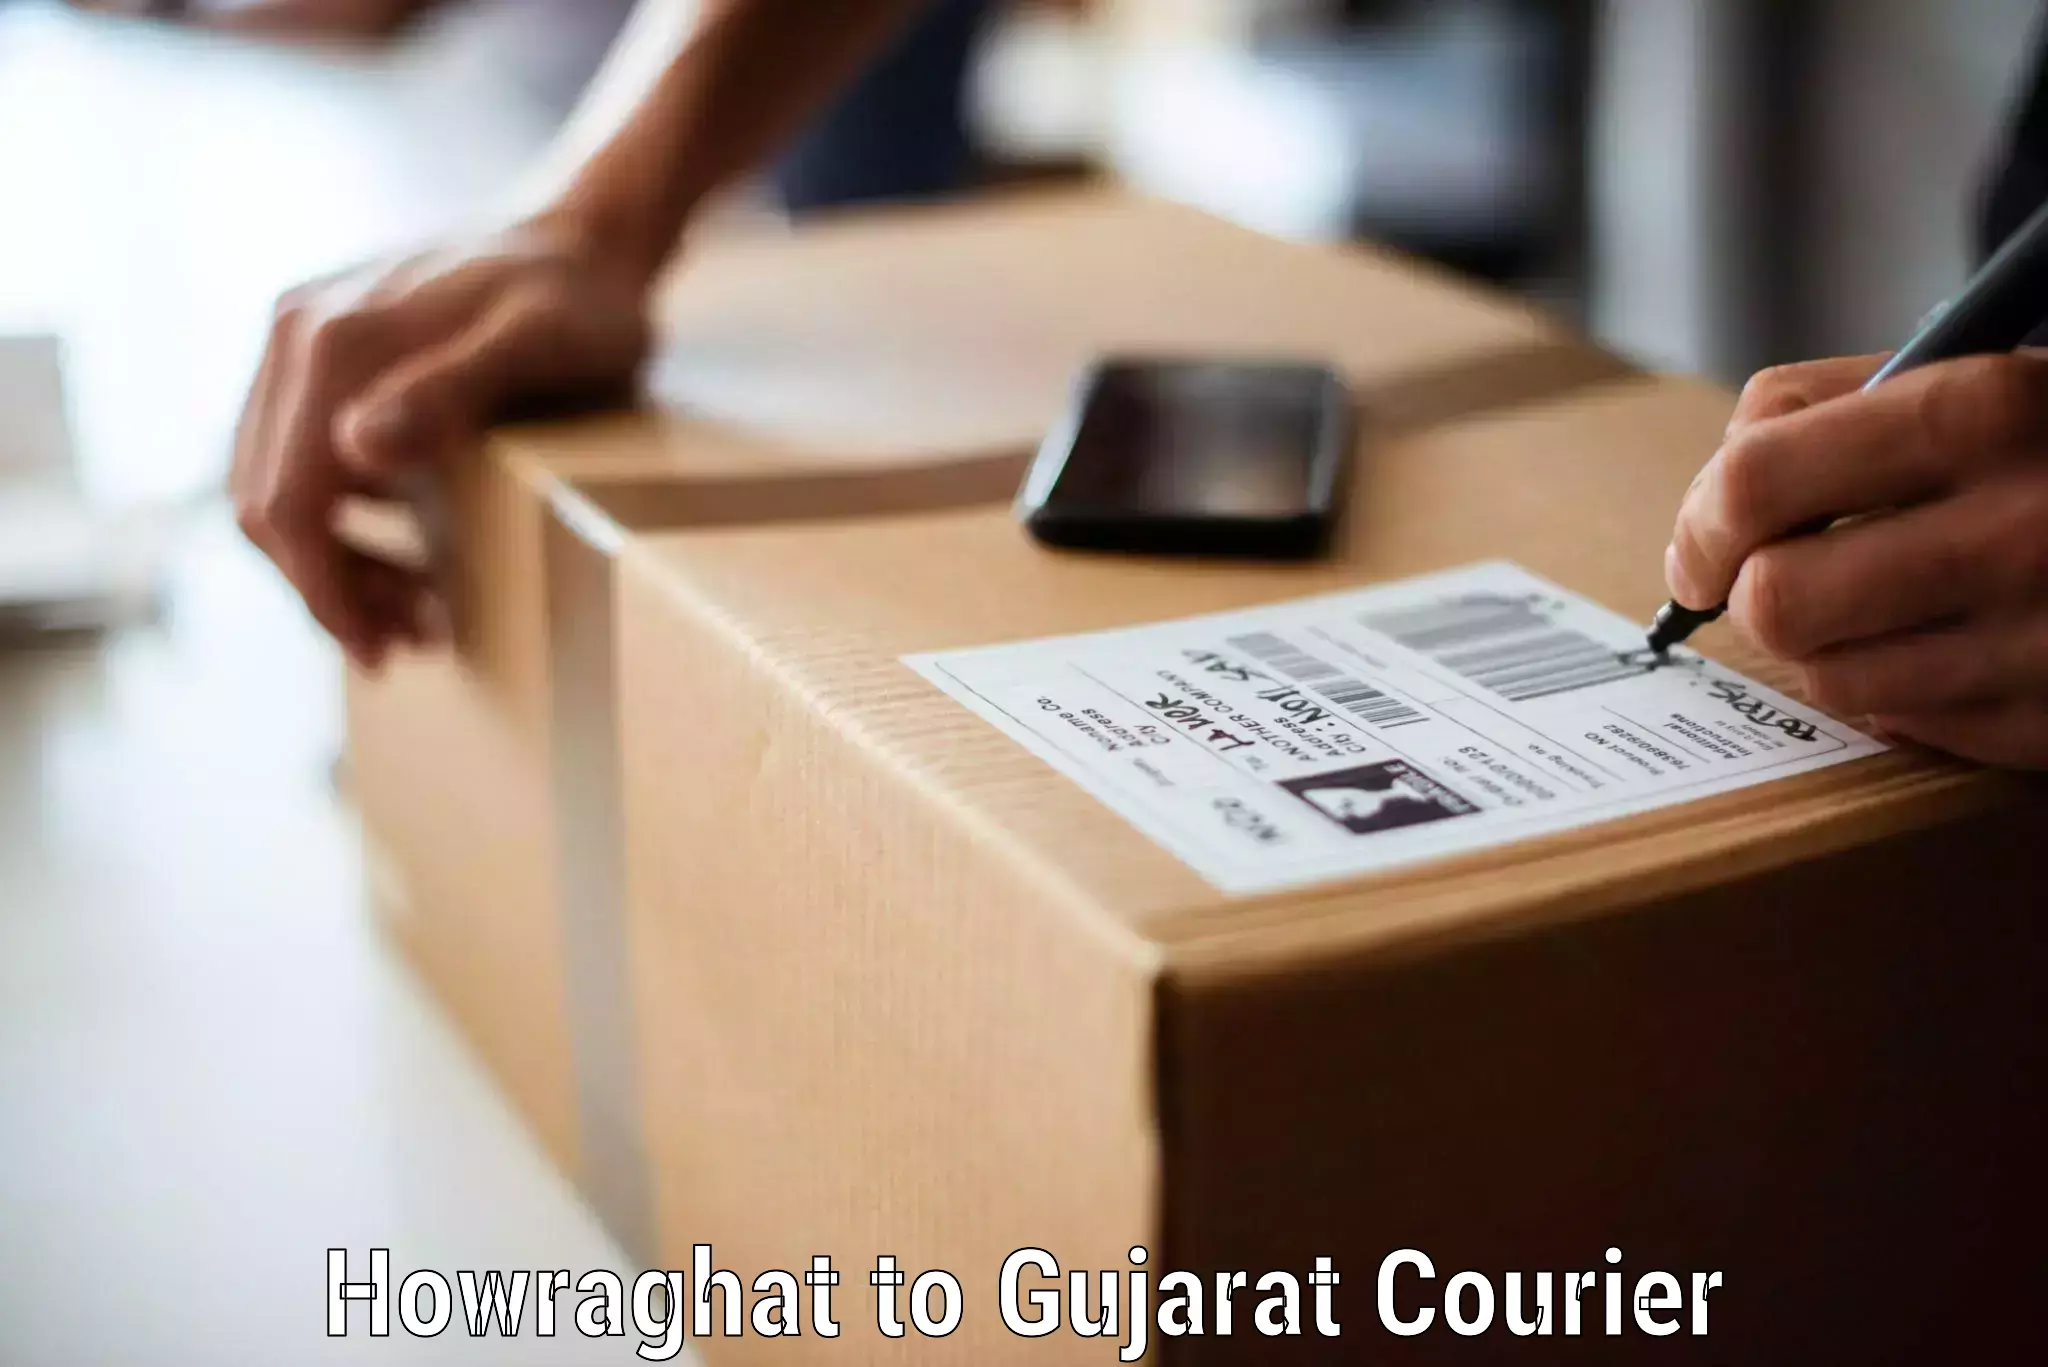 Specialized household transport Howraghat to Nadiad